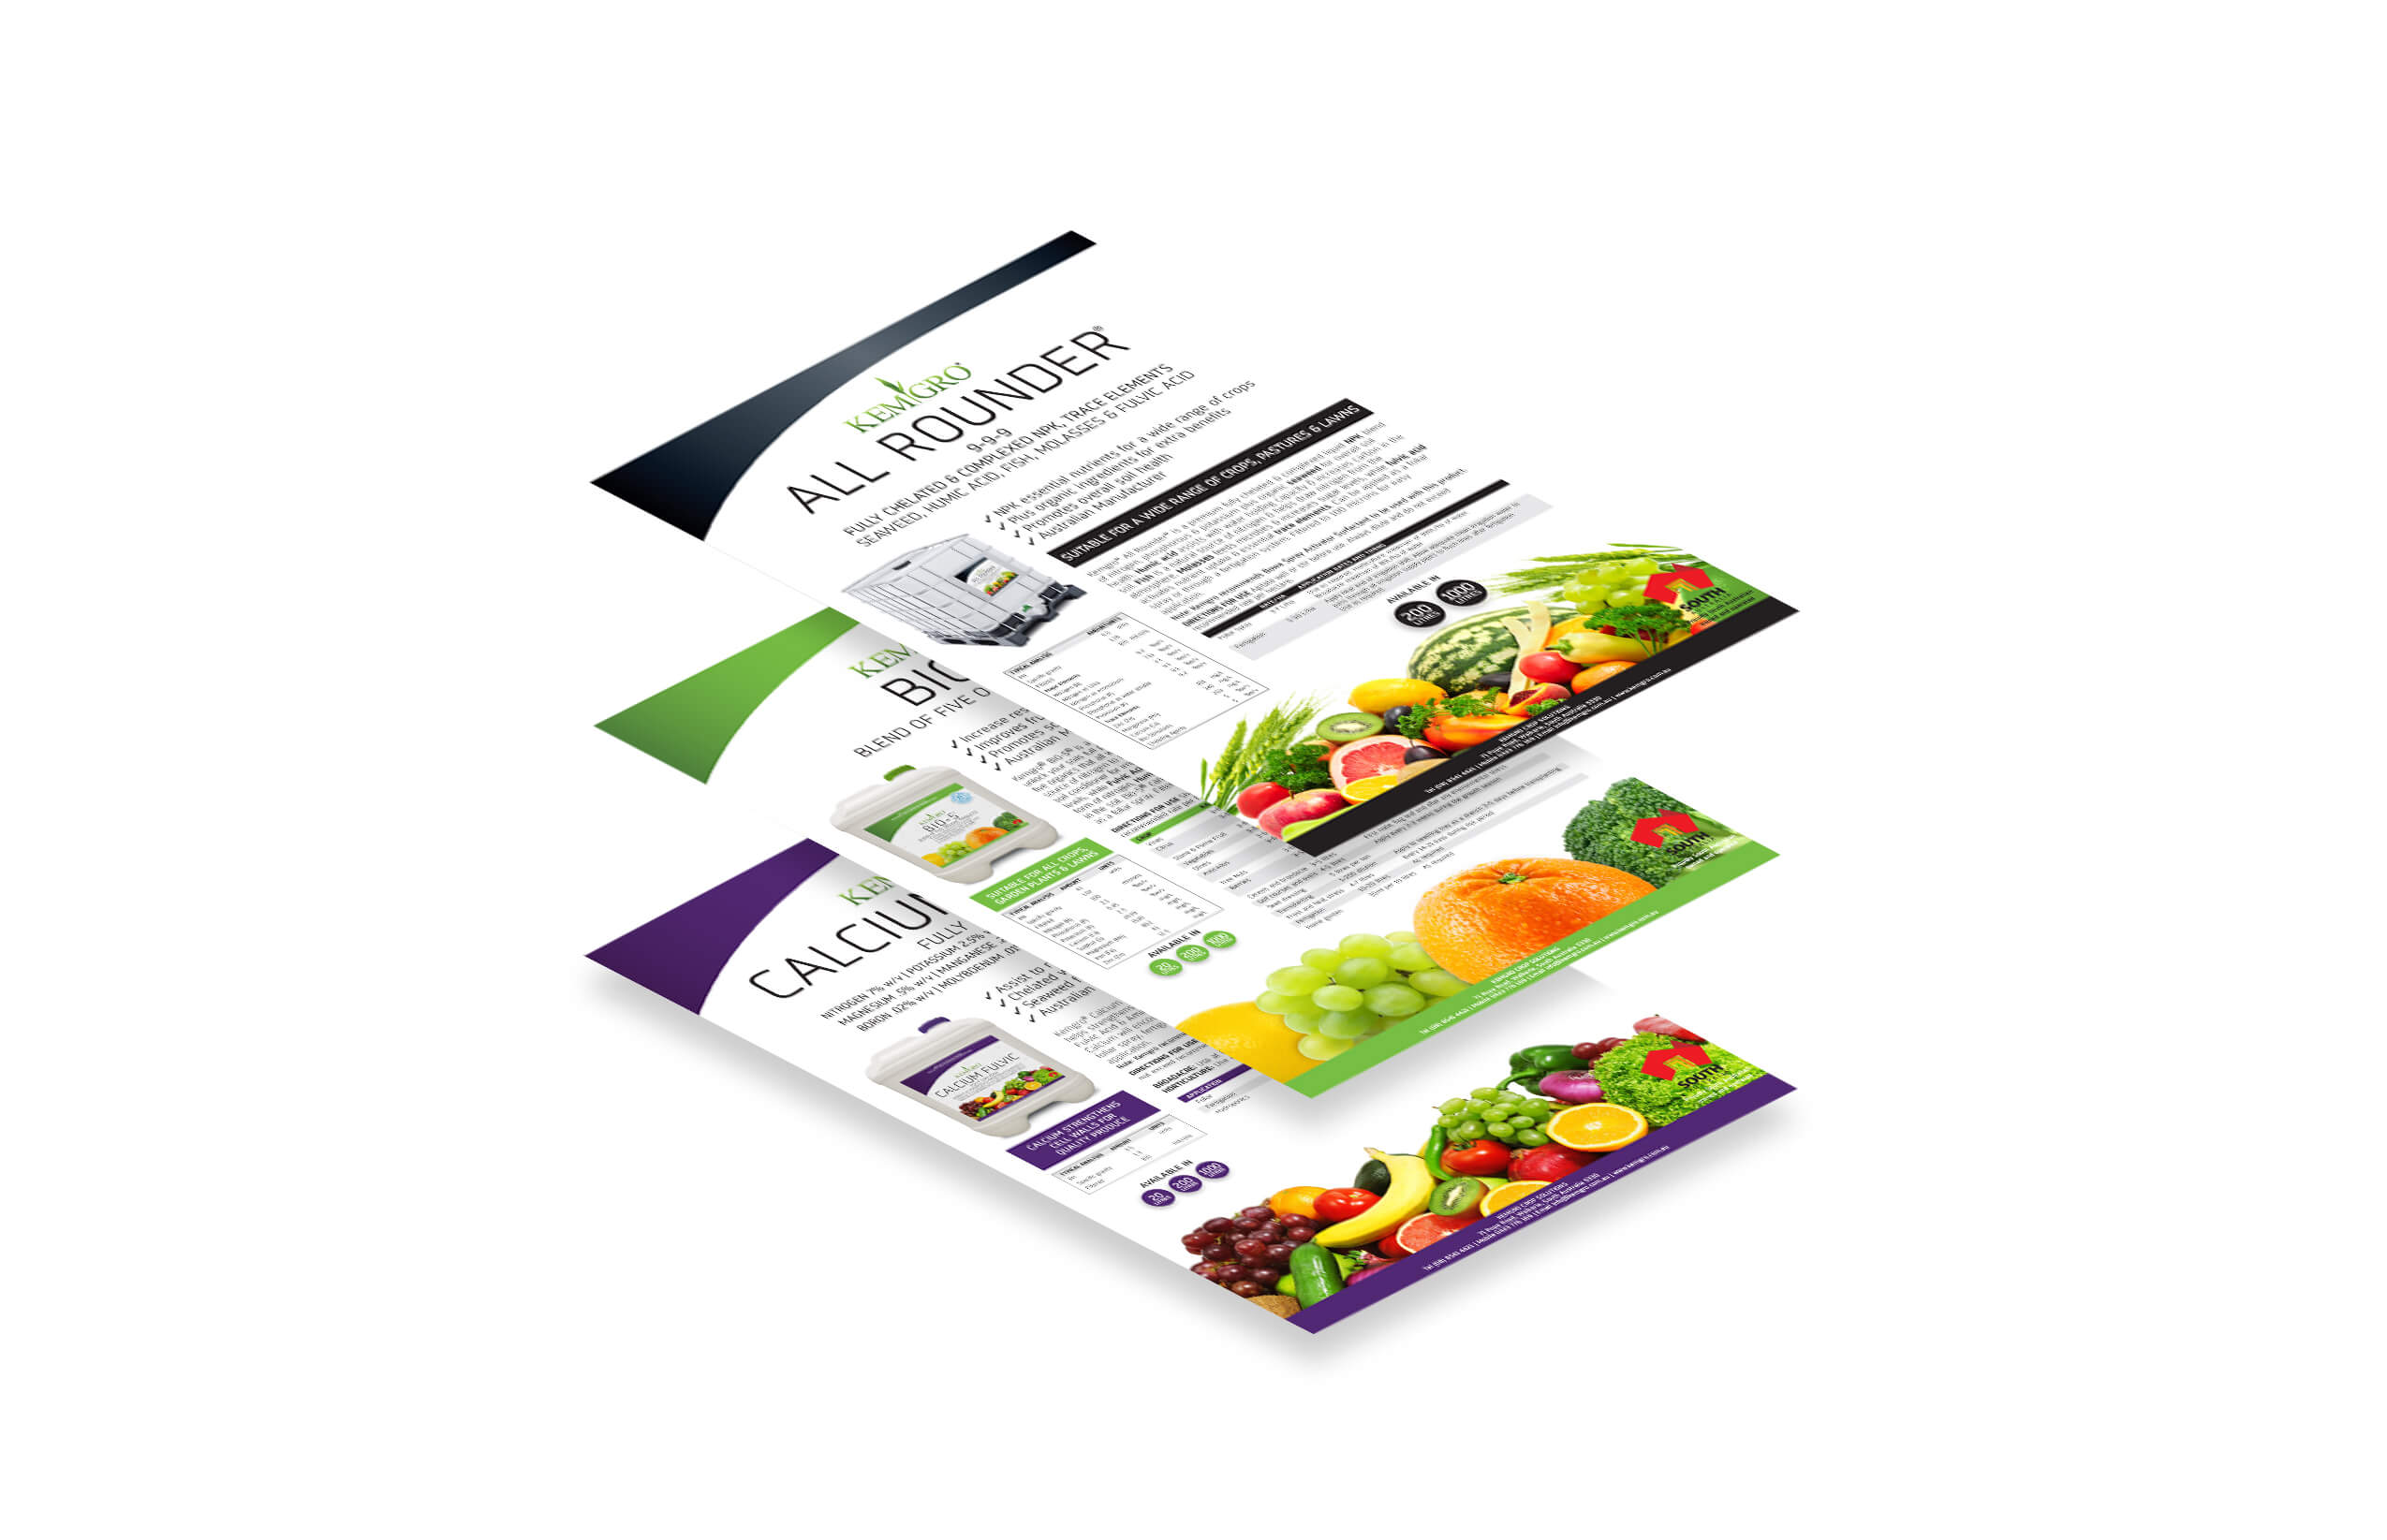 Icon Web Design Adelaide. Image of Kemgro website pages stacked vertically